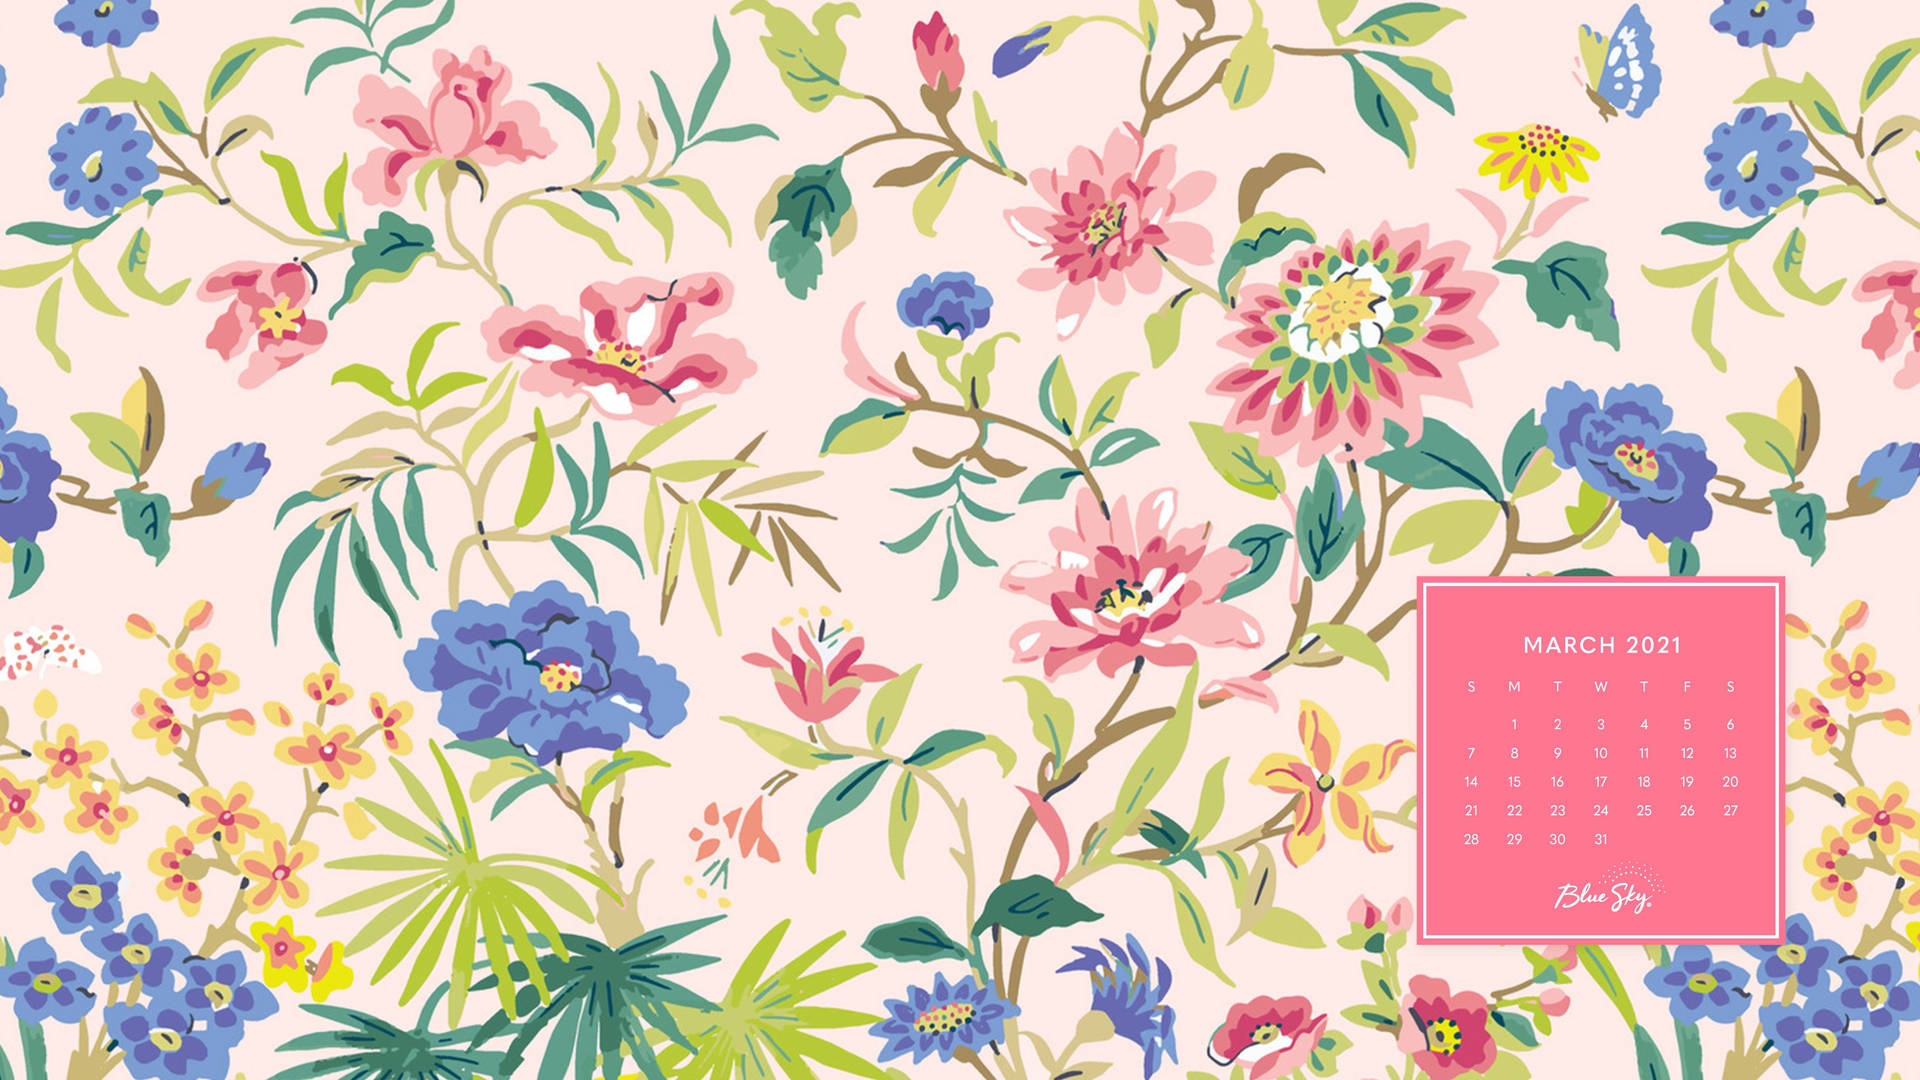 March Calendar With Floral Design